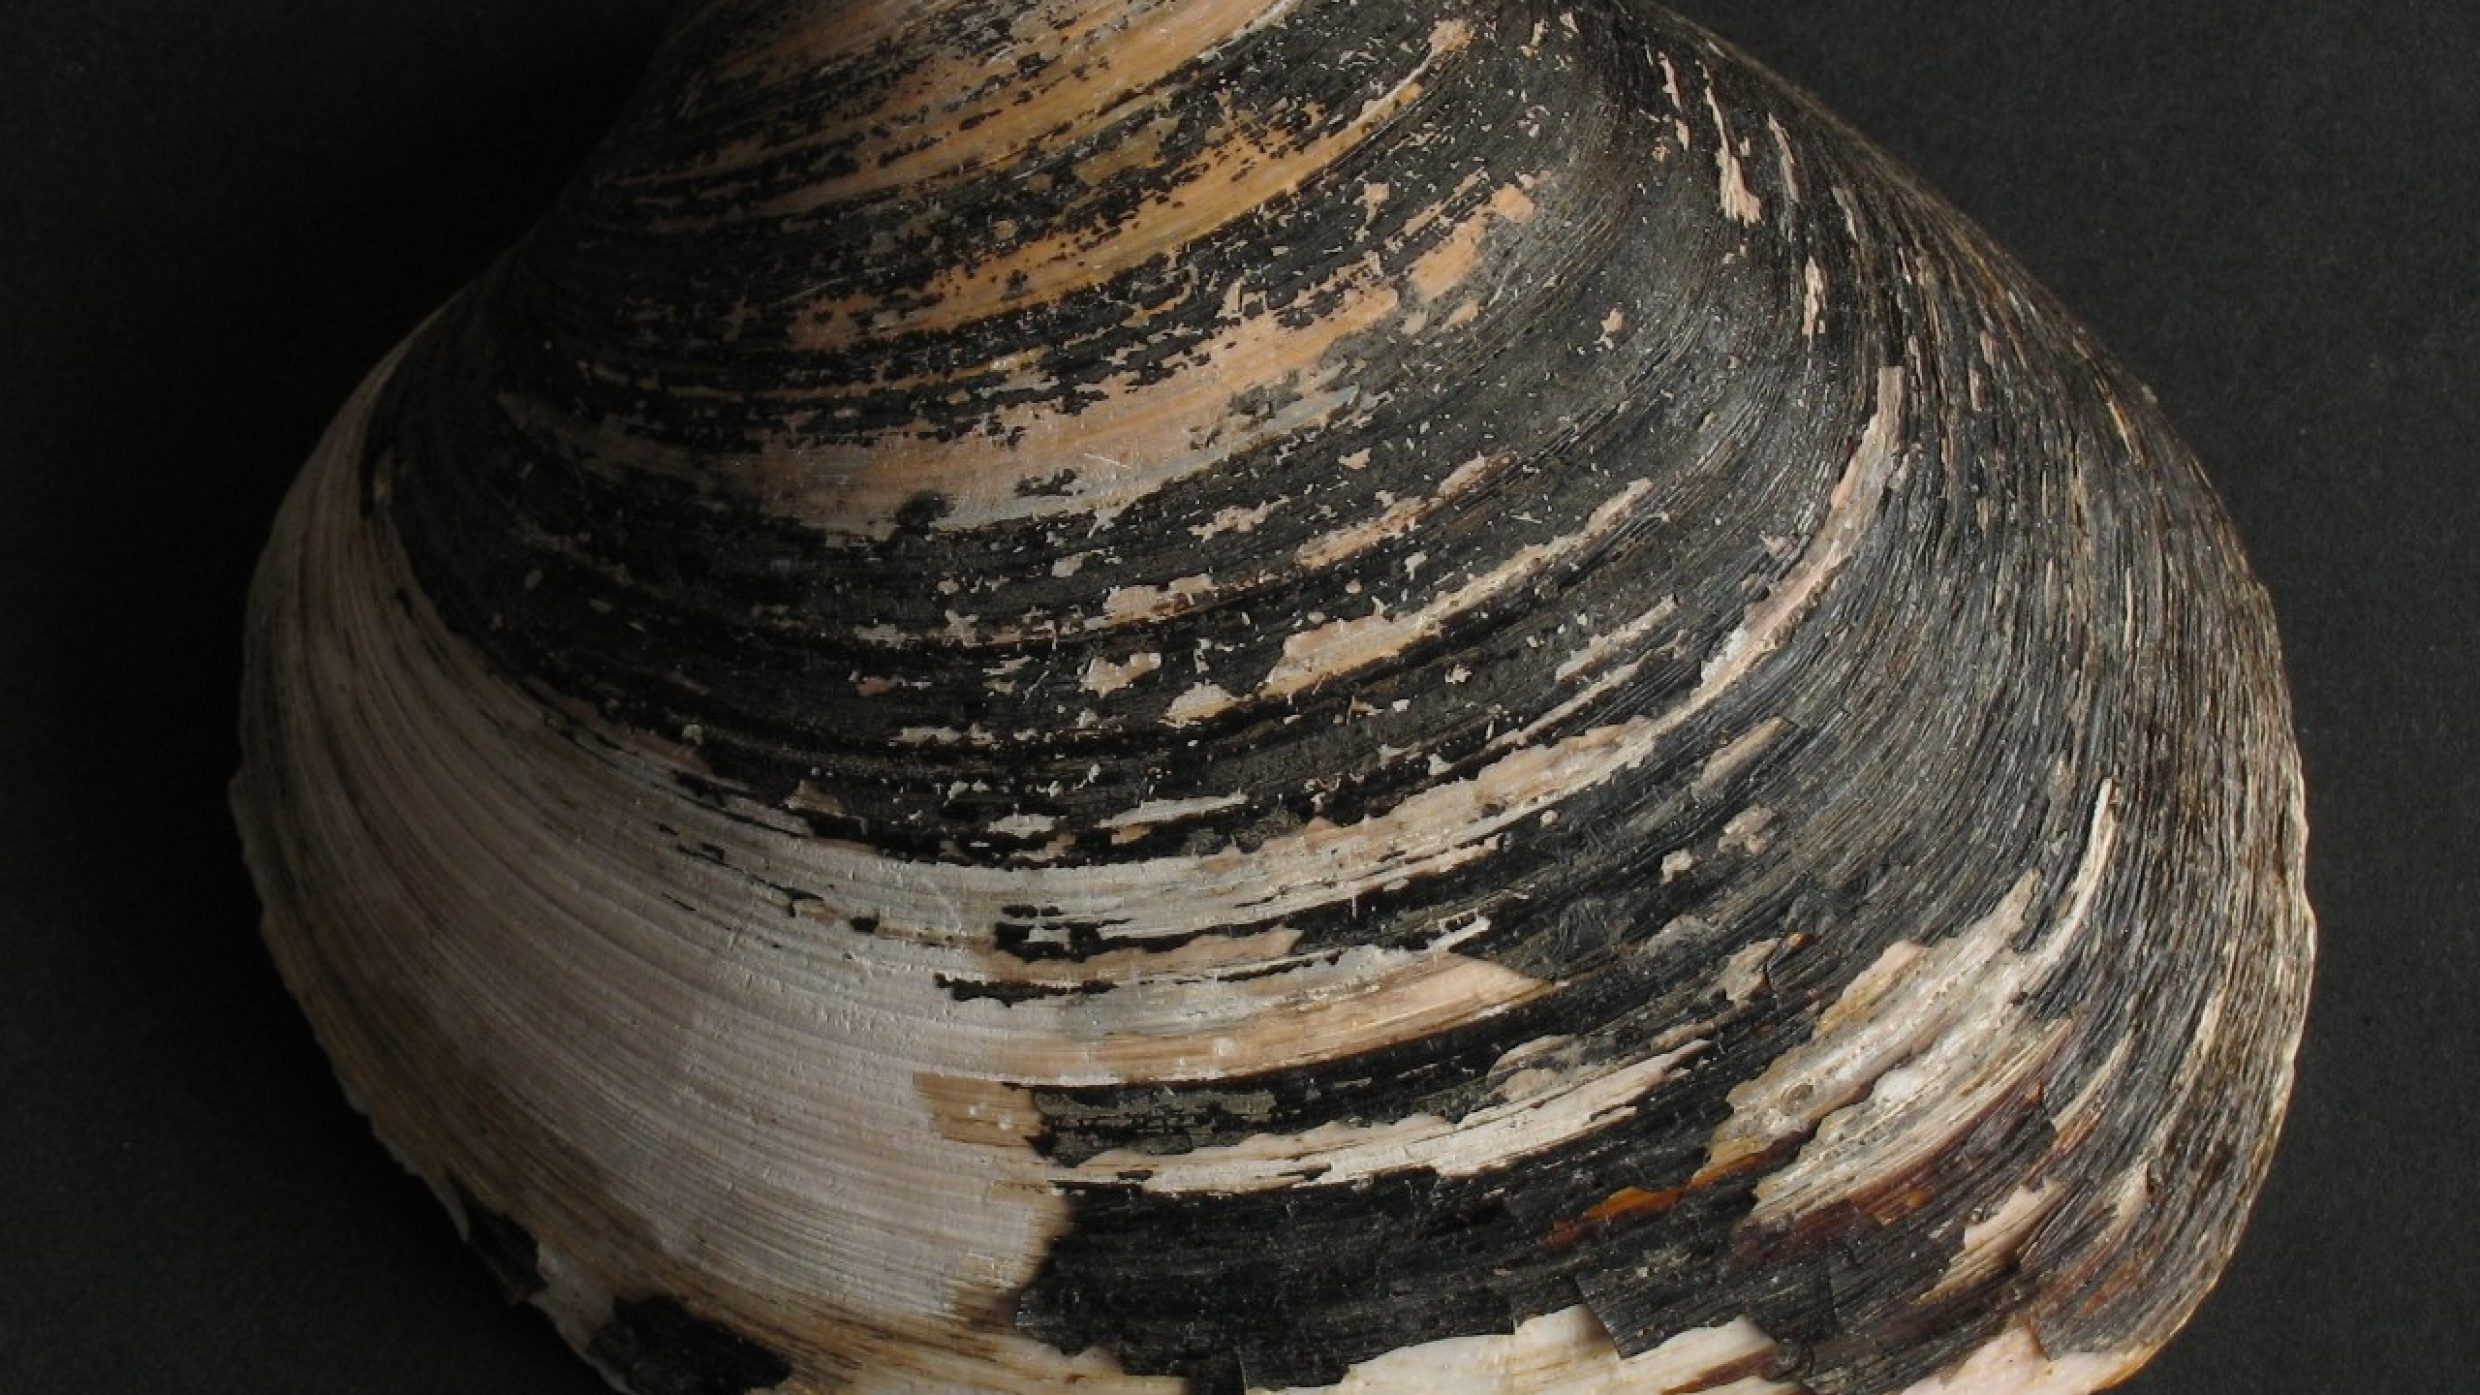  The oldest documented age for a clam is 507 (their age can be measured by the rings on the shell). The clam lies hidden in the mud on the sea floor of the Atlantic, North Sea and Baltic and can be found at depths of around 100m. 